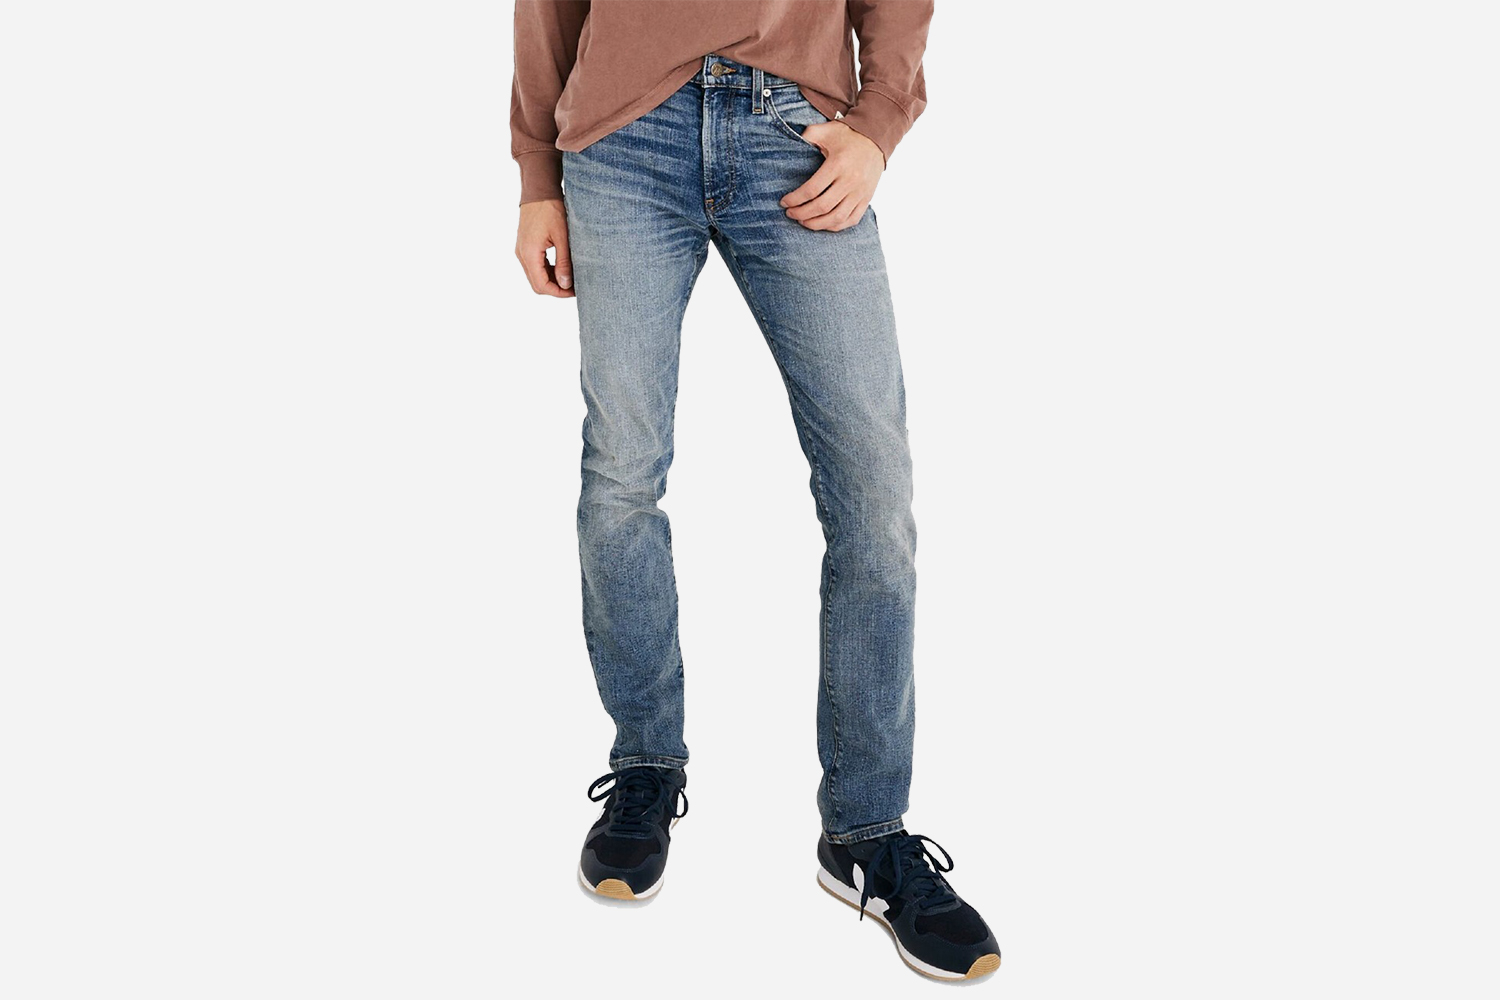 Madewell Men's Slim Fit Jeans in Baywood Wash